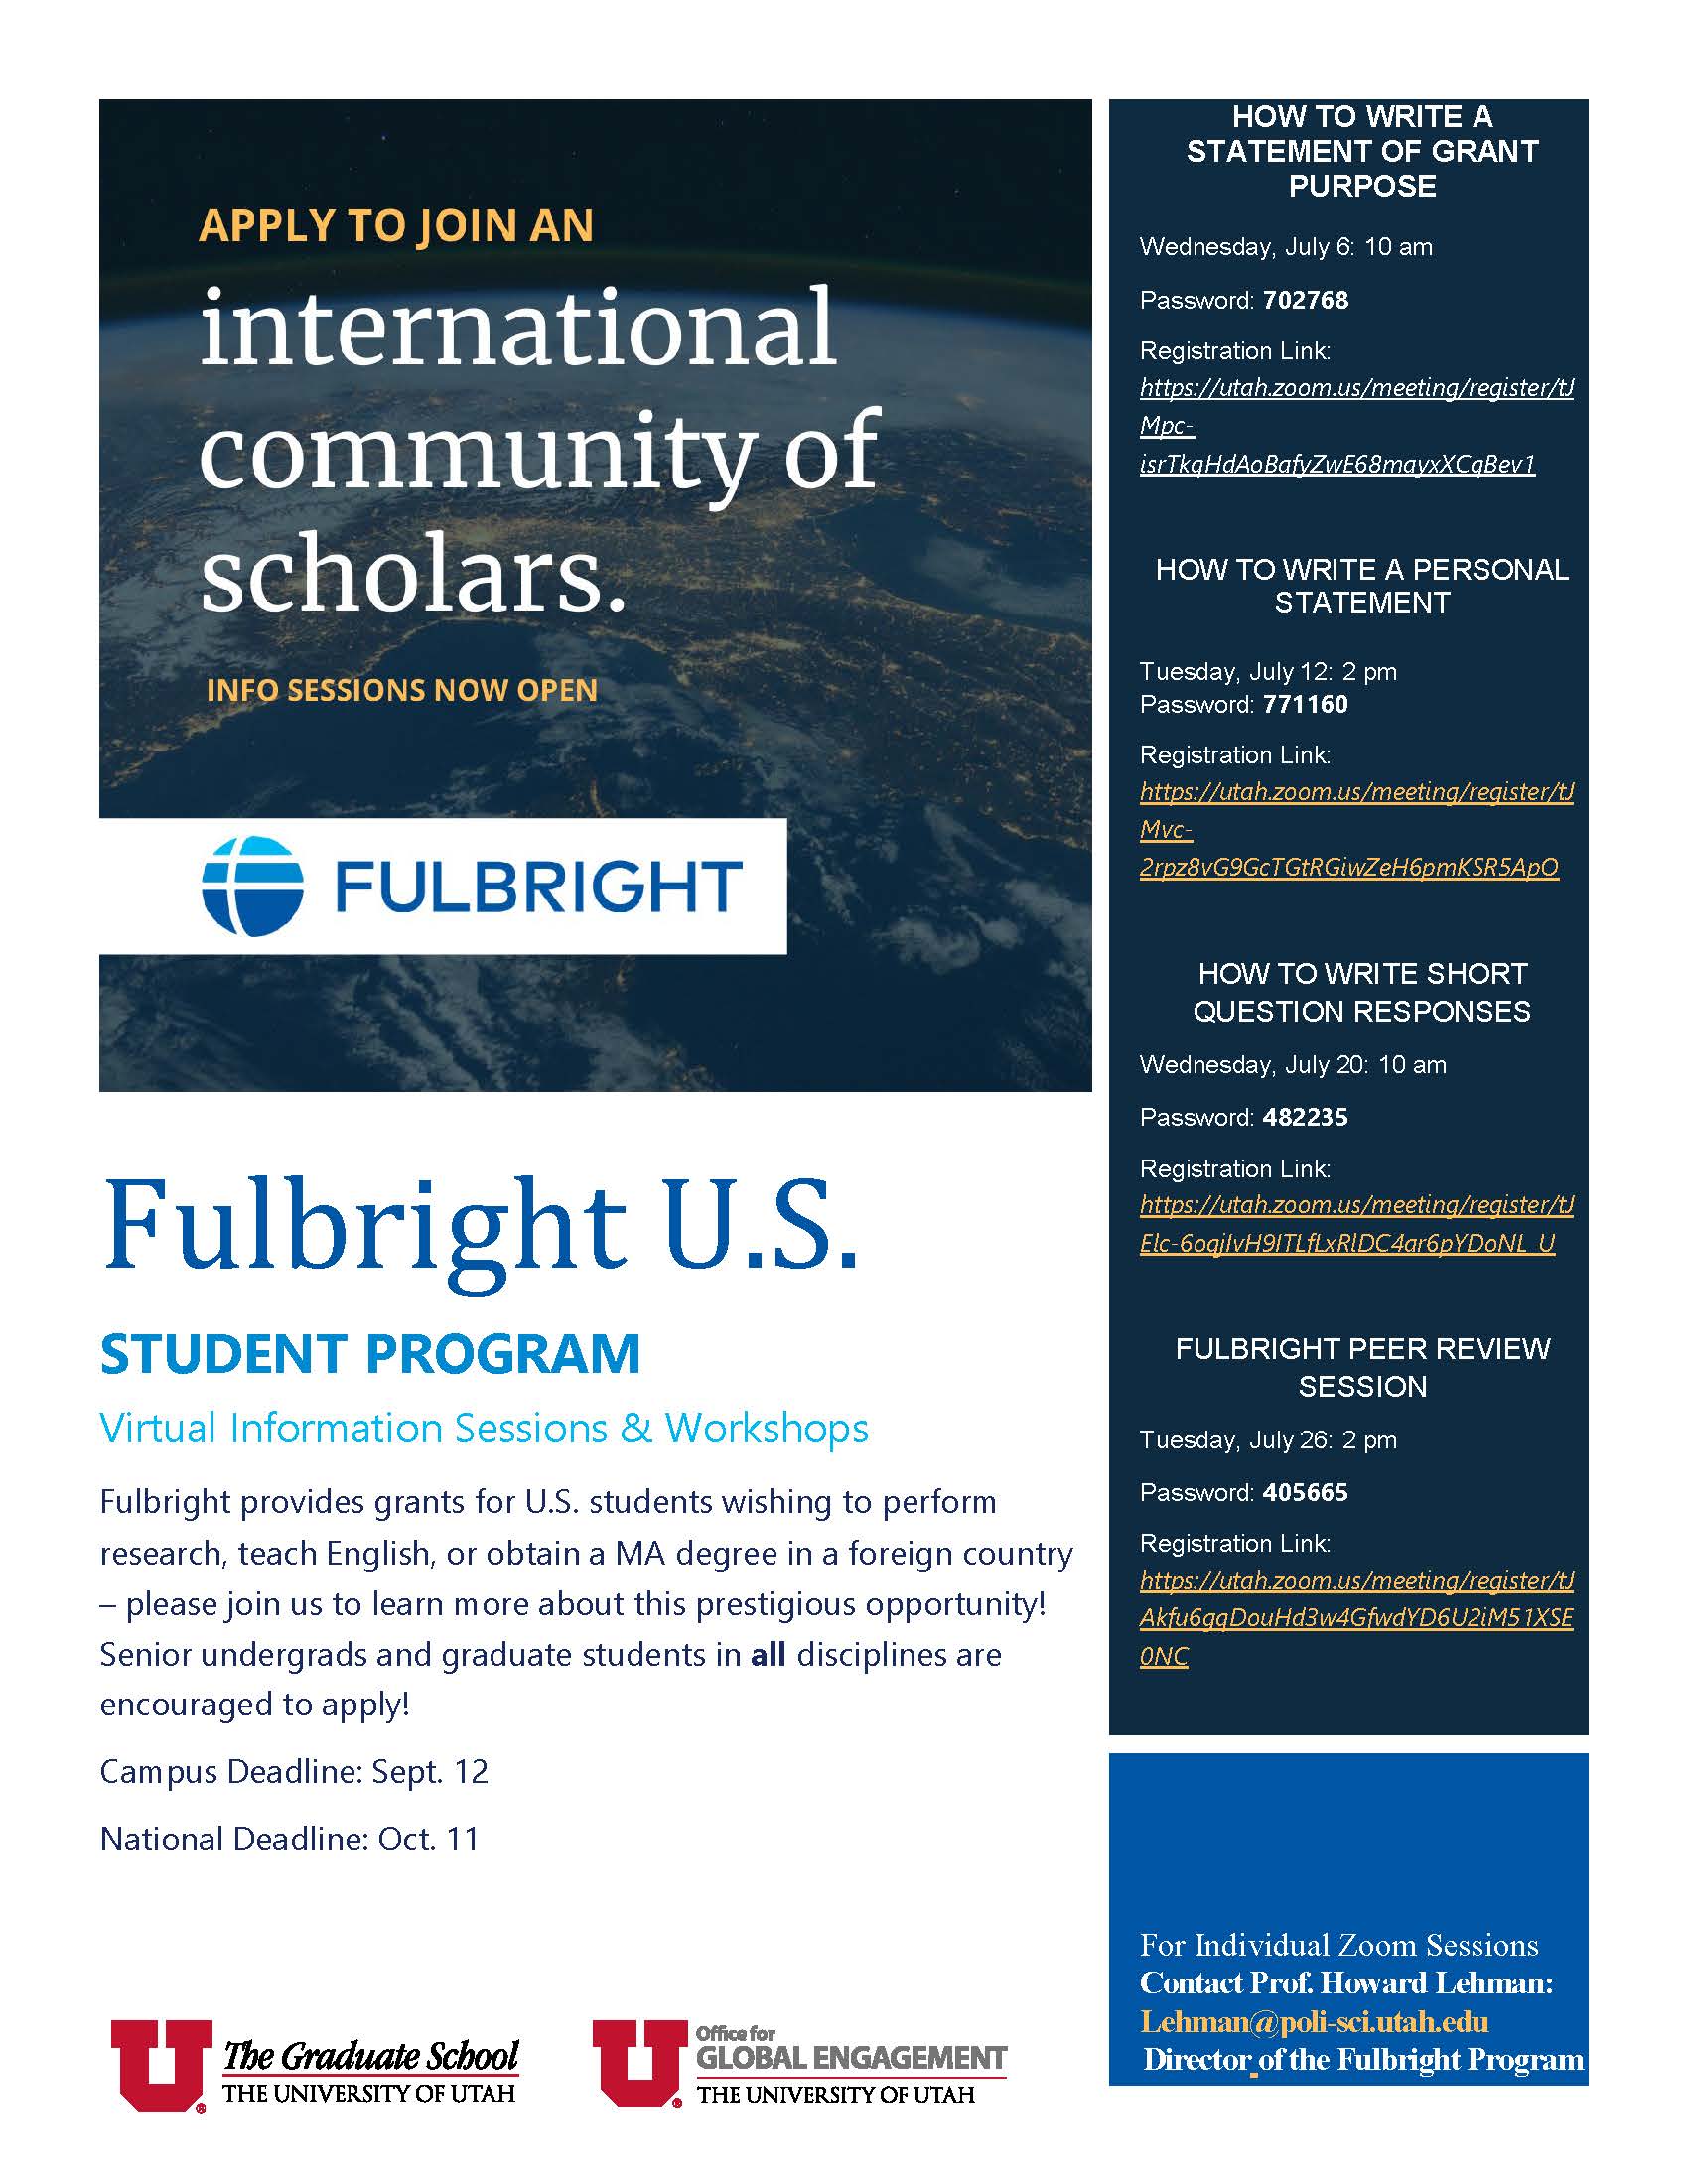 fulbright grant info sessions